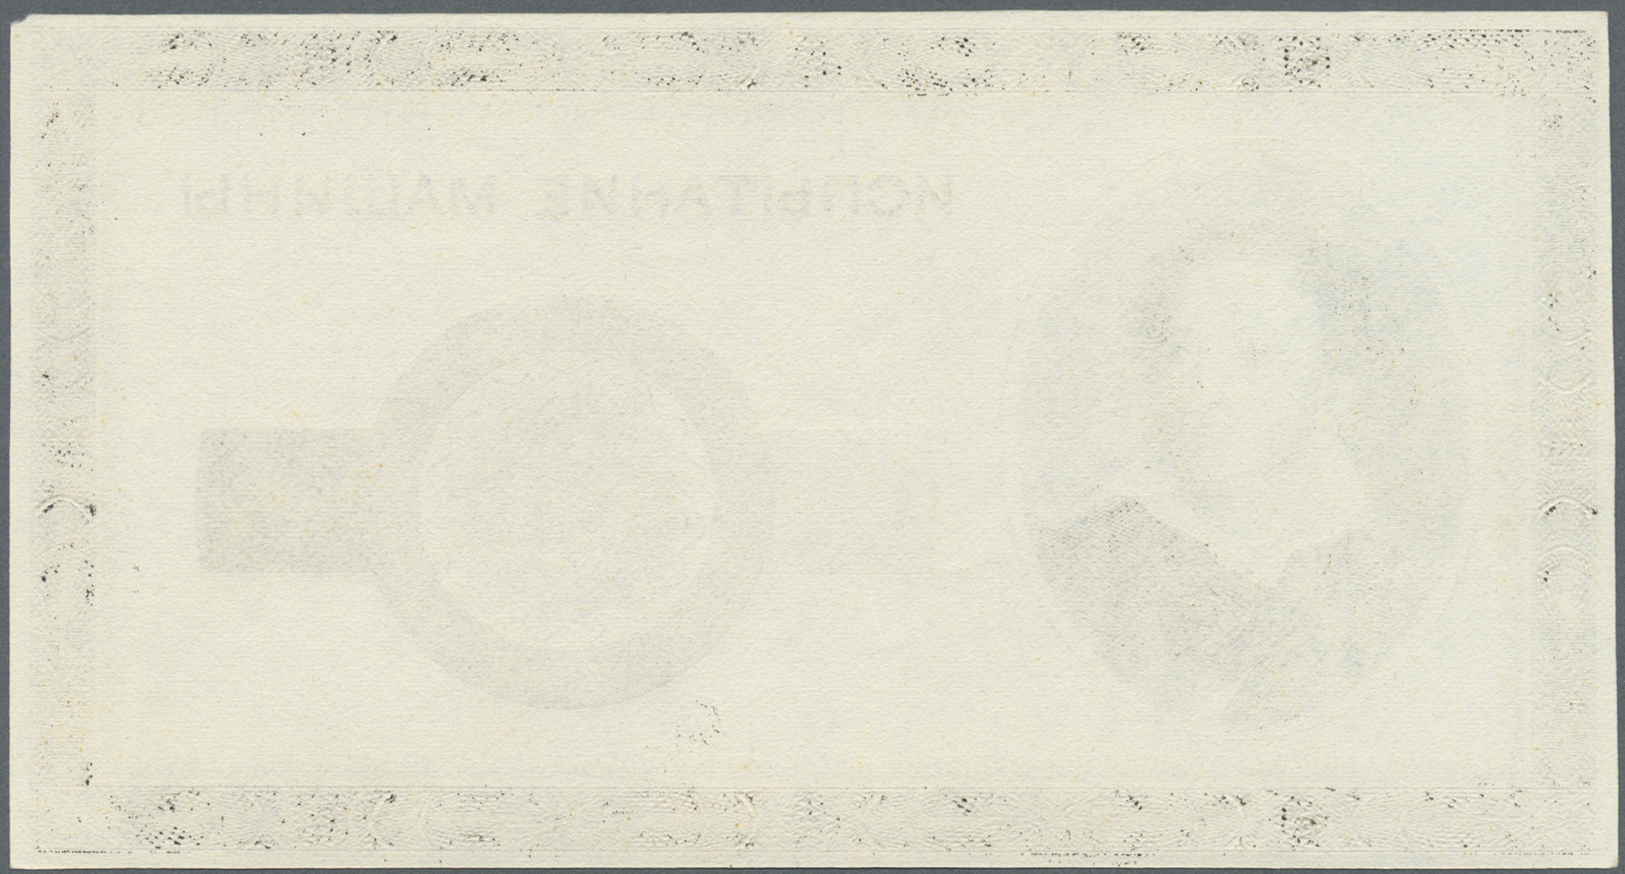 03534 Testbanknoten: Intaglio Printed Test Note Uniface On Banknote Paper, Printed By ABNC On A Giori Press, Portrait Pu - Fictifs & Spécimens